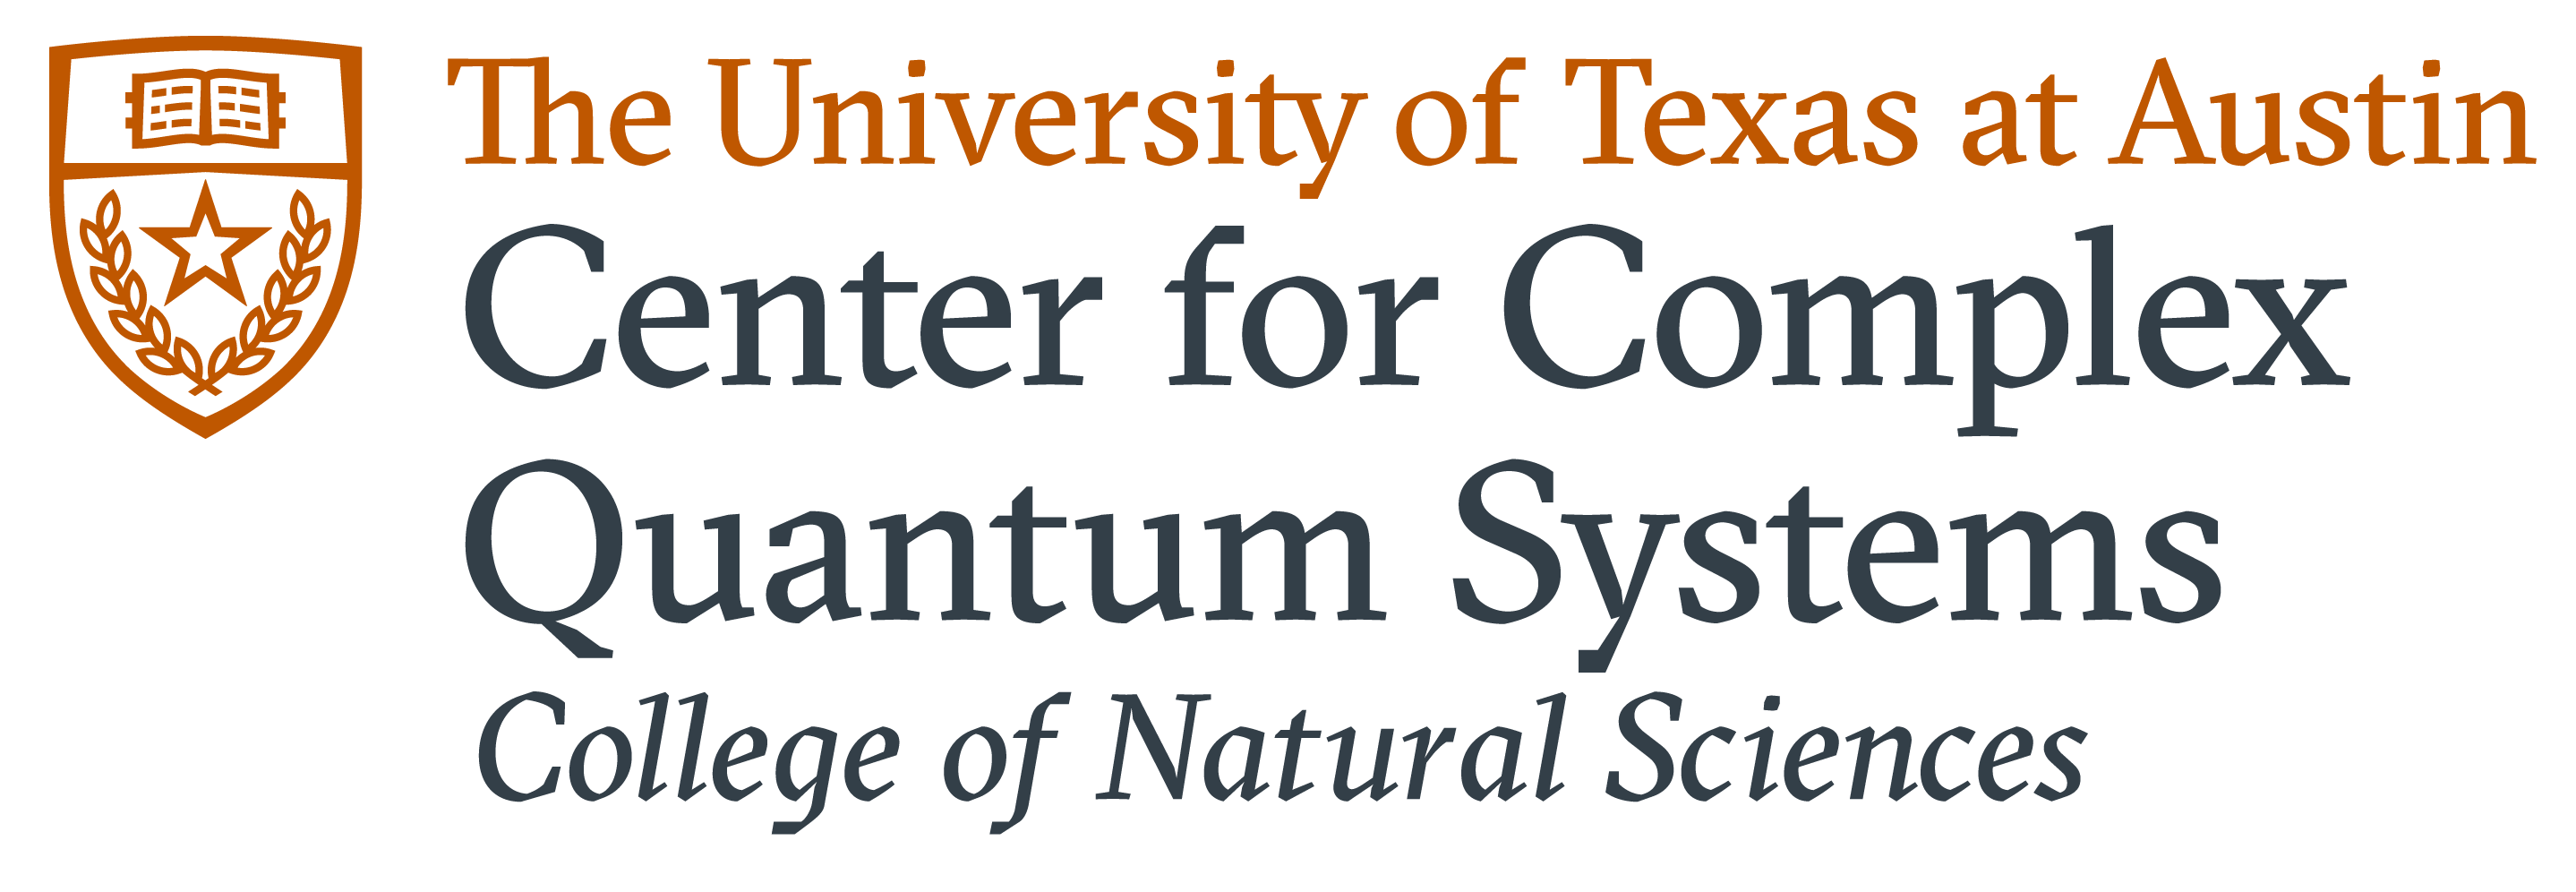 The Center for Complex Quantum Systems